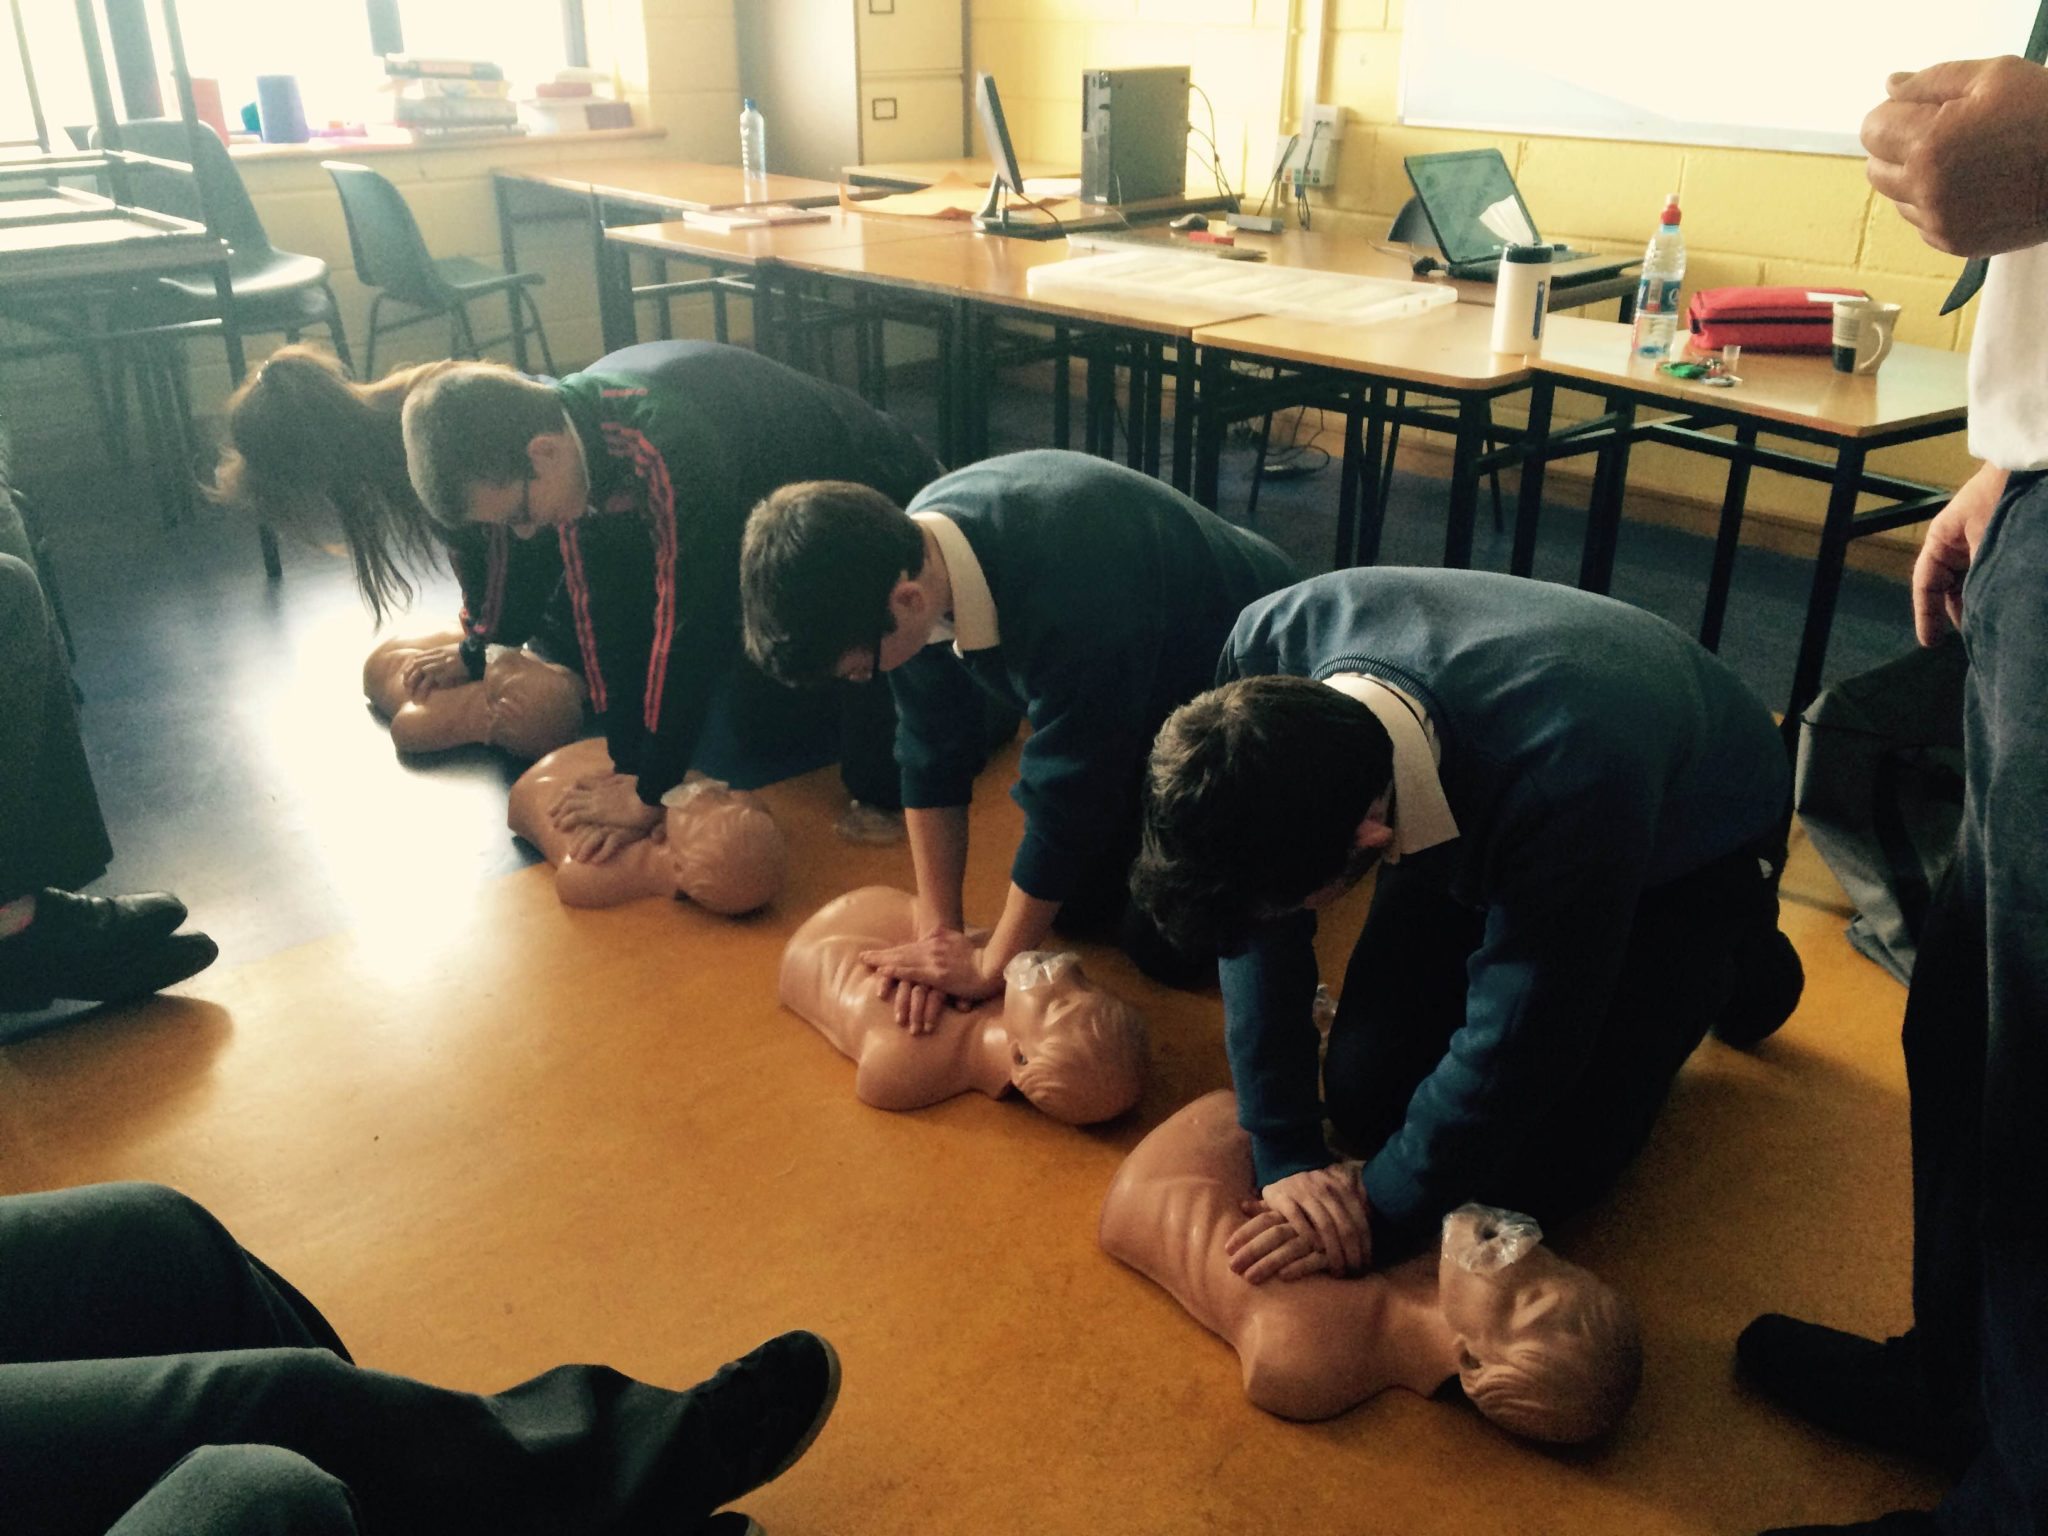 Desmond College students acquire competency in performing CPR as part of the Transition Year First Aid Certificate: May 2015